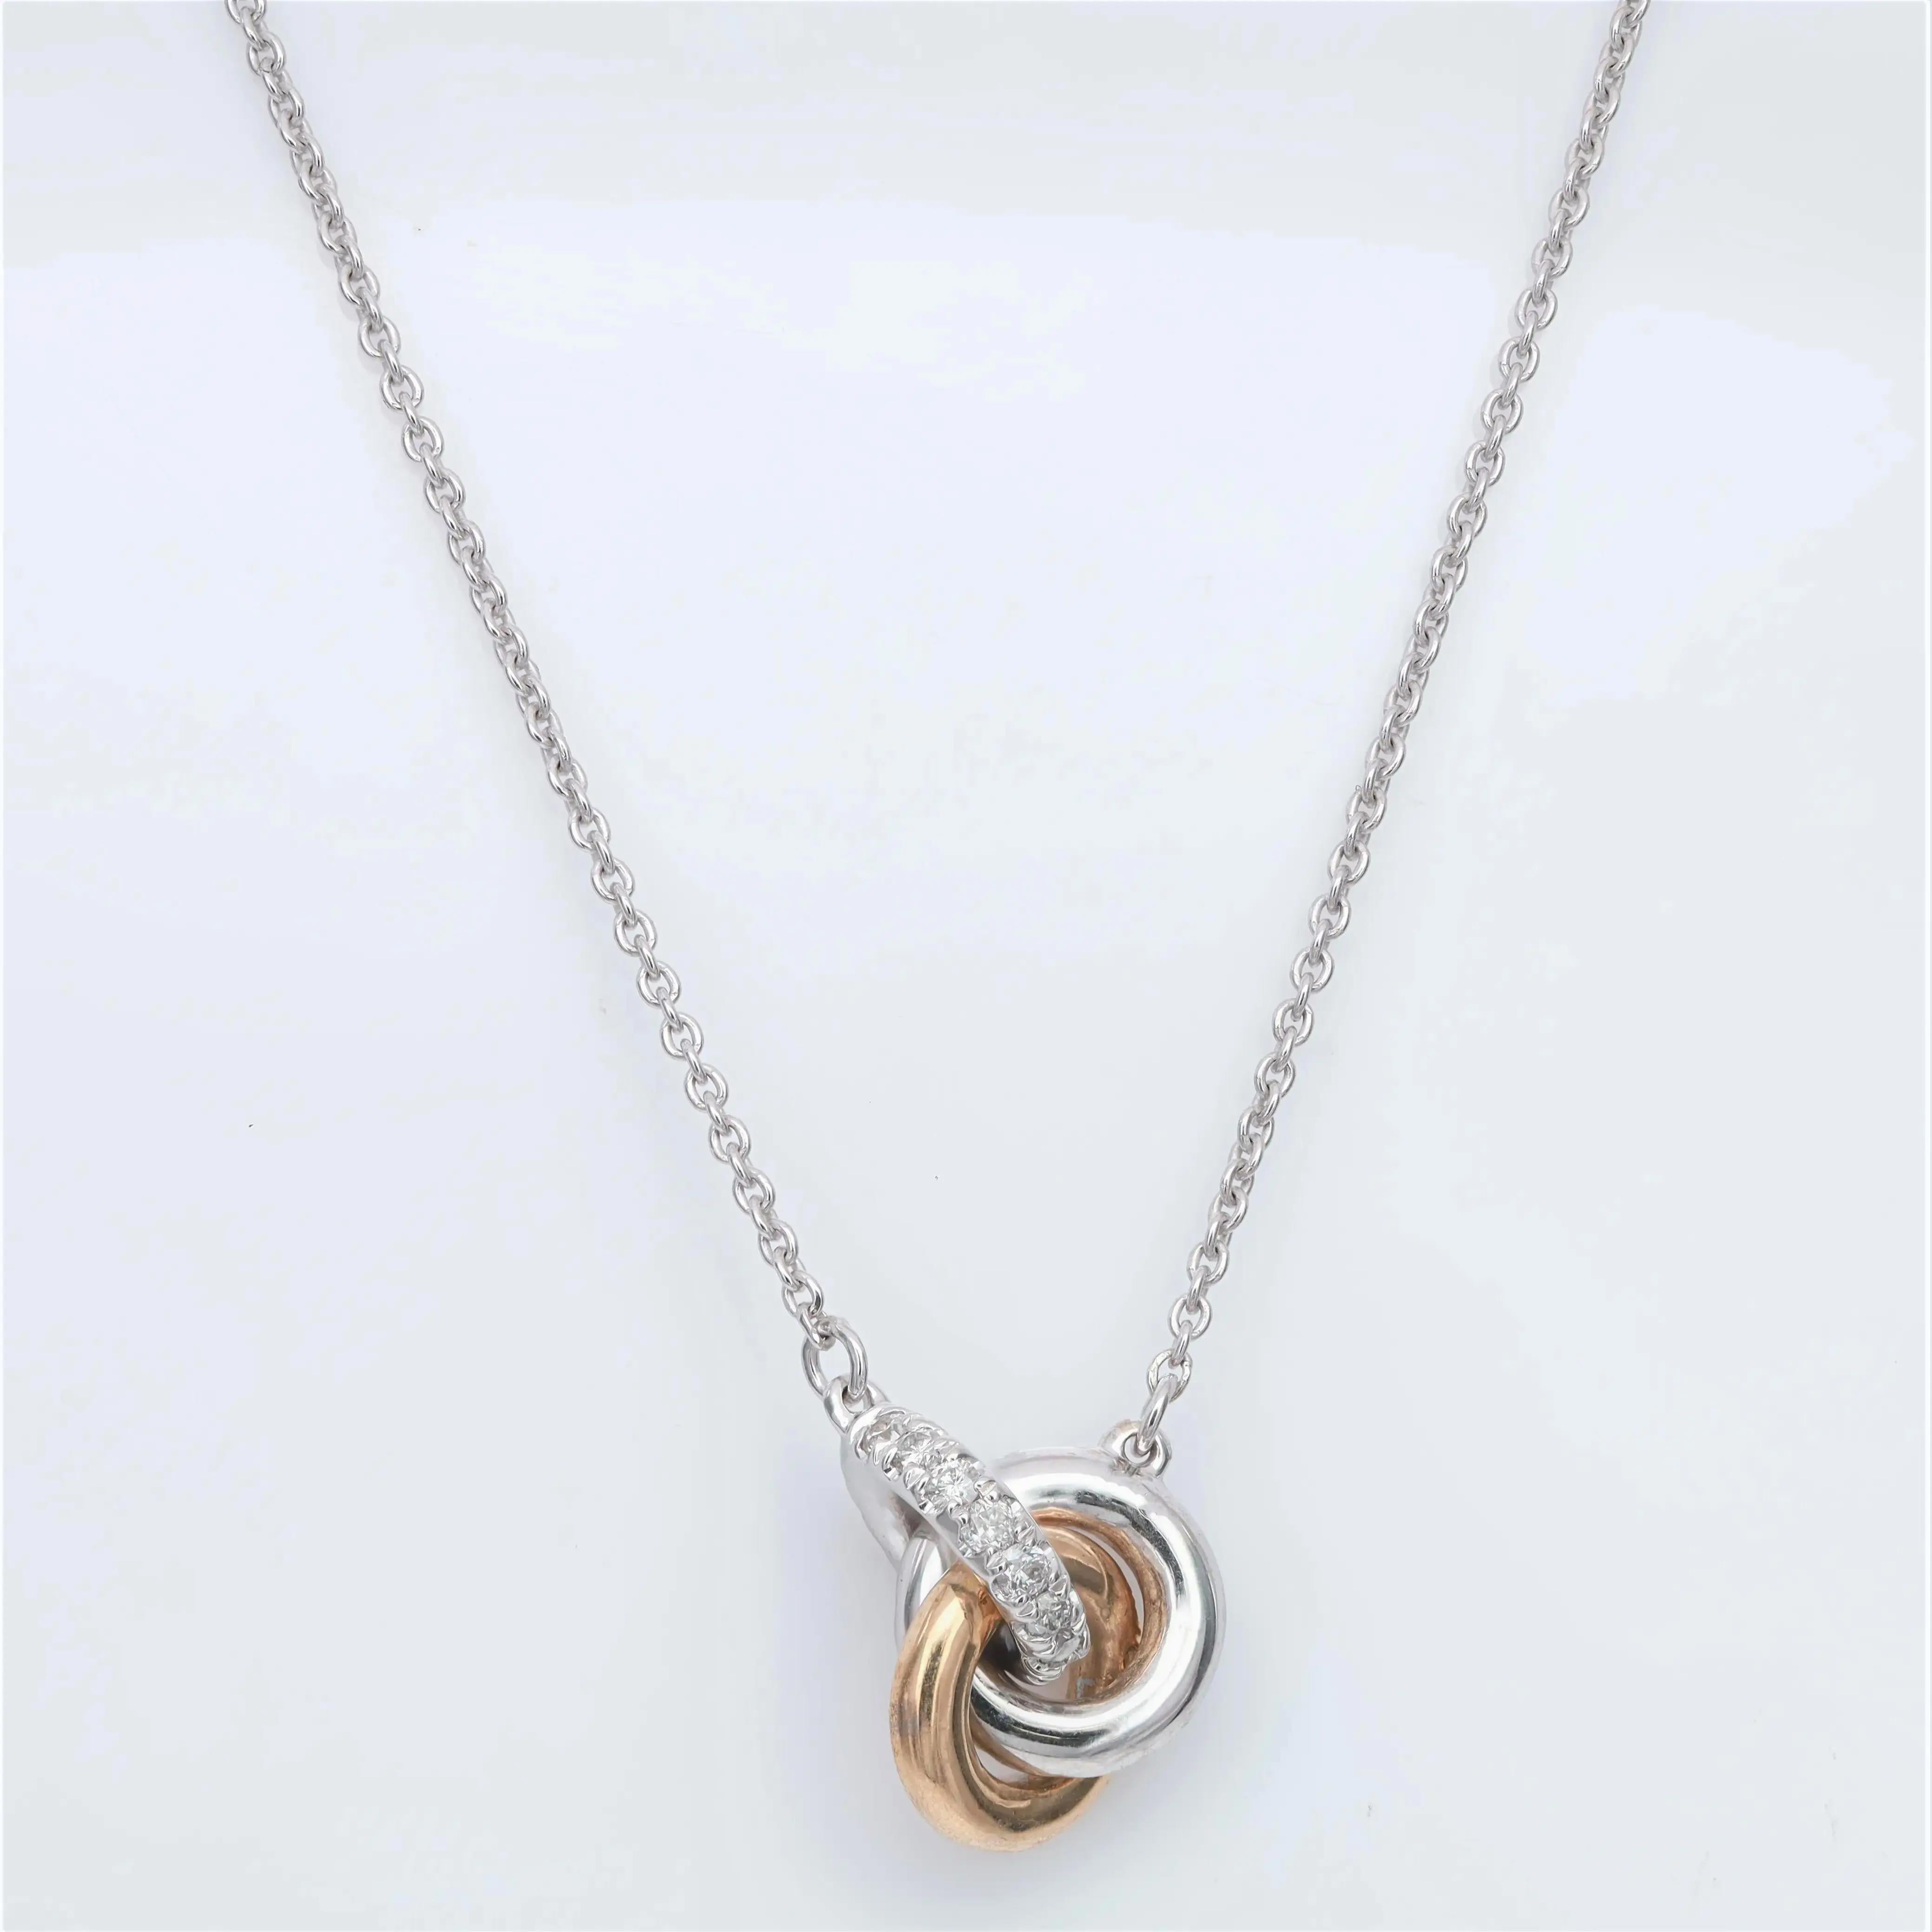 Modern 0.25cttw Round Cut Diamond Two Tone Pendant Necklace 10k White & Yellow Gold For Sale